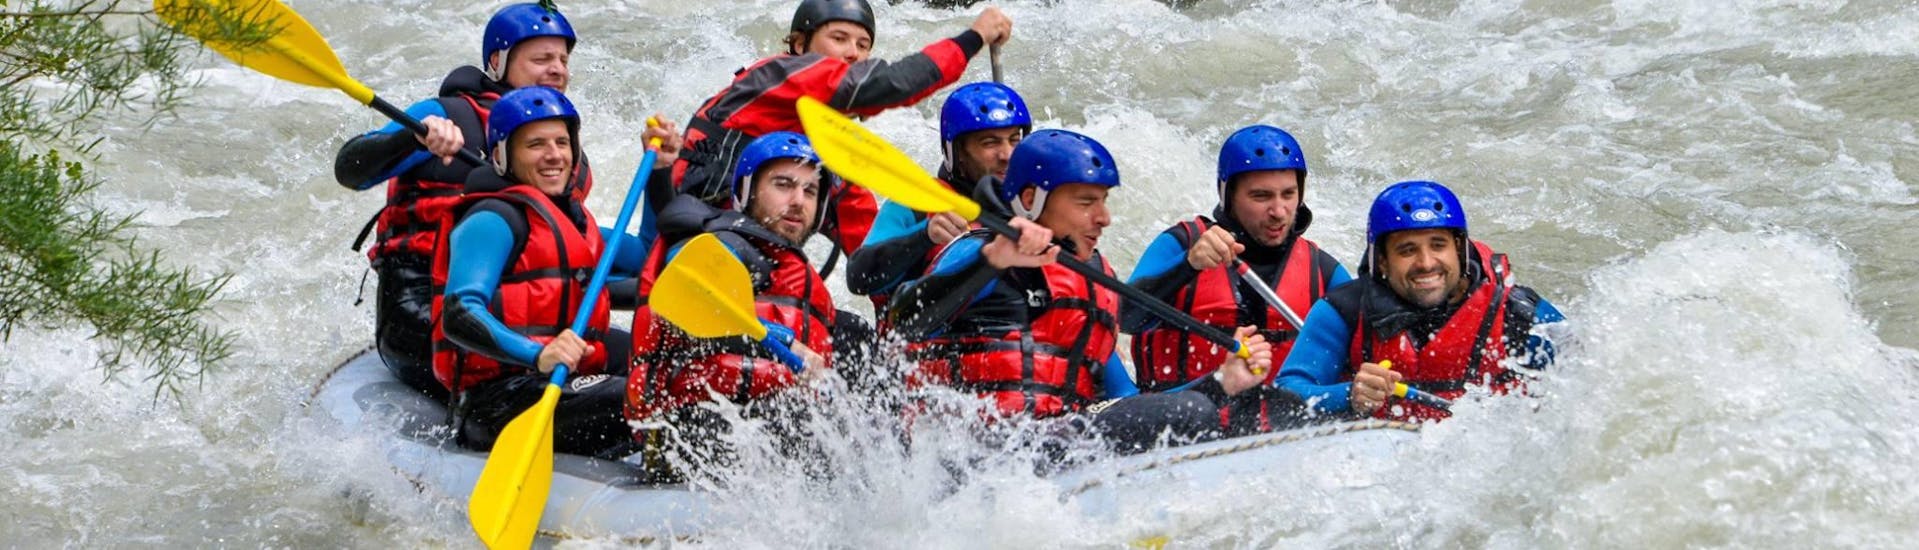 Action photo on the river while rafting on the Verdon - Heart of the Gorges.